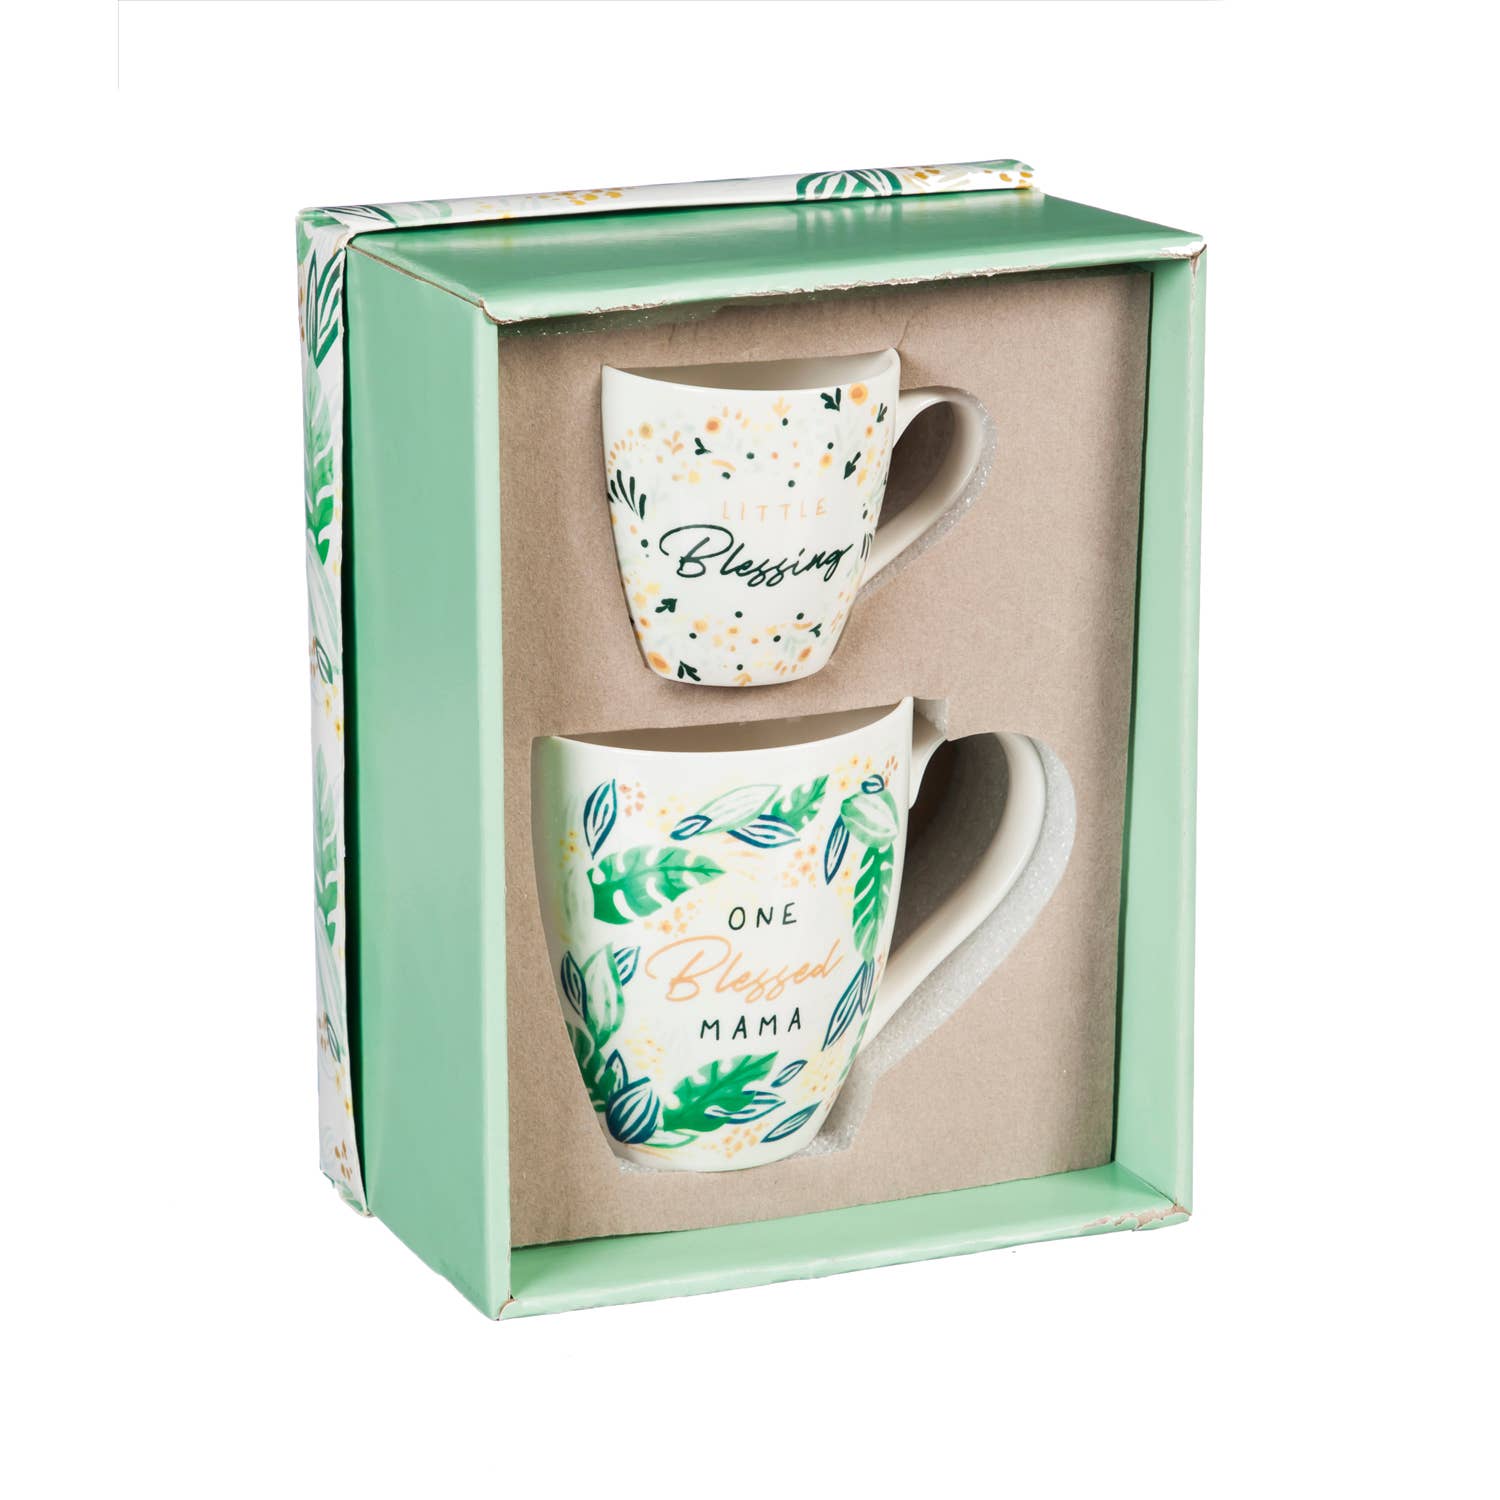 Mommy and Me Ceramic Cup Gift Set, One Blessed Mama/ Little Blessing